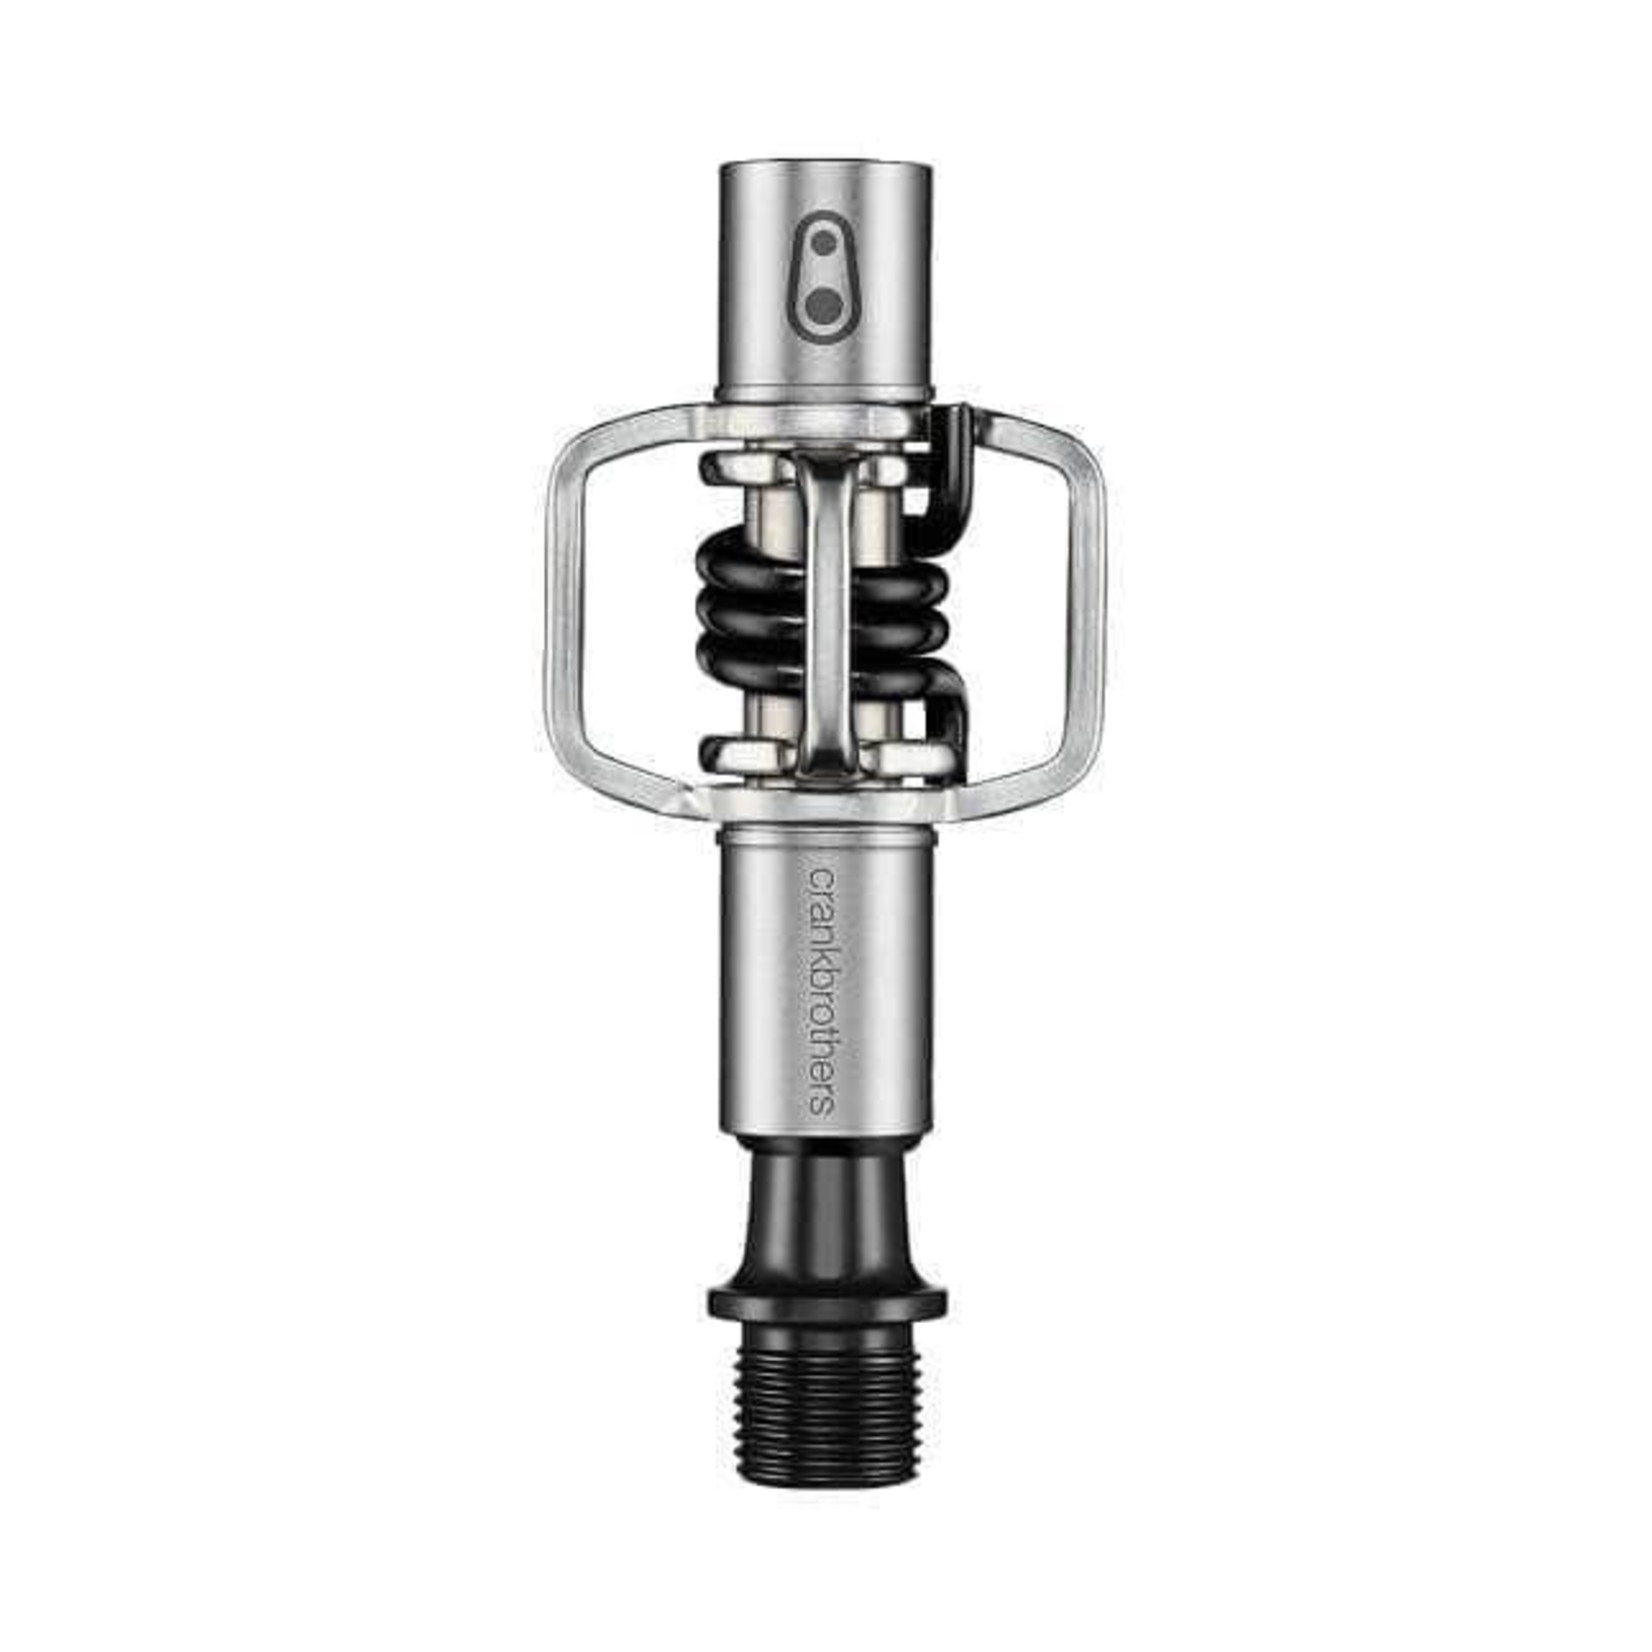 Crankbrothers Crankbrothers Eggbeater 1 Pedal